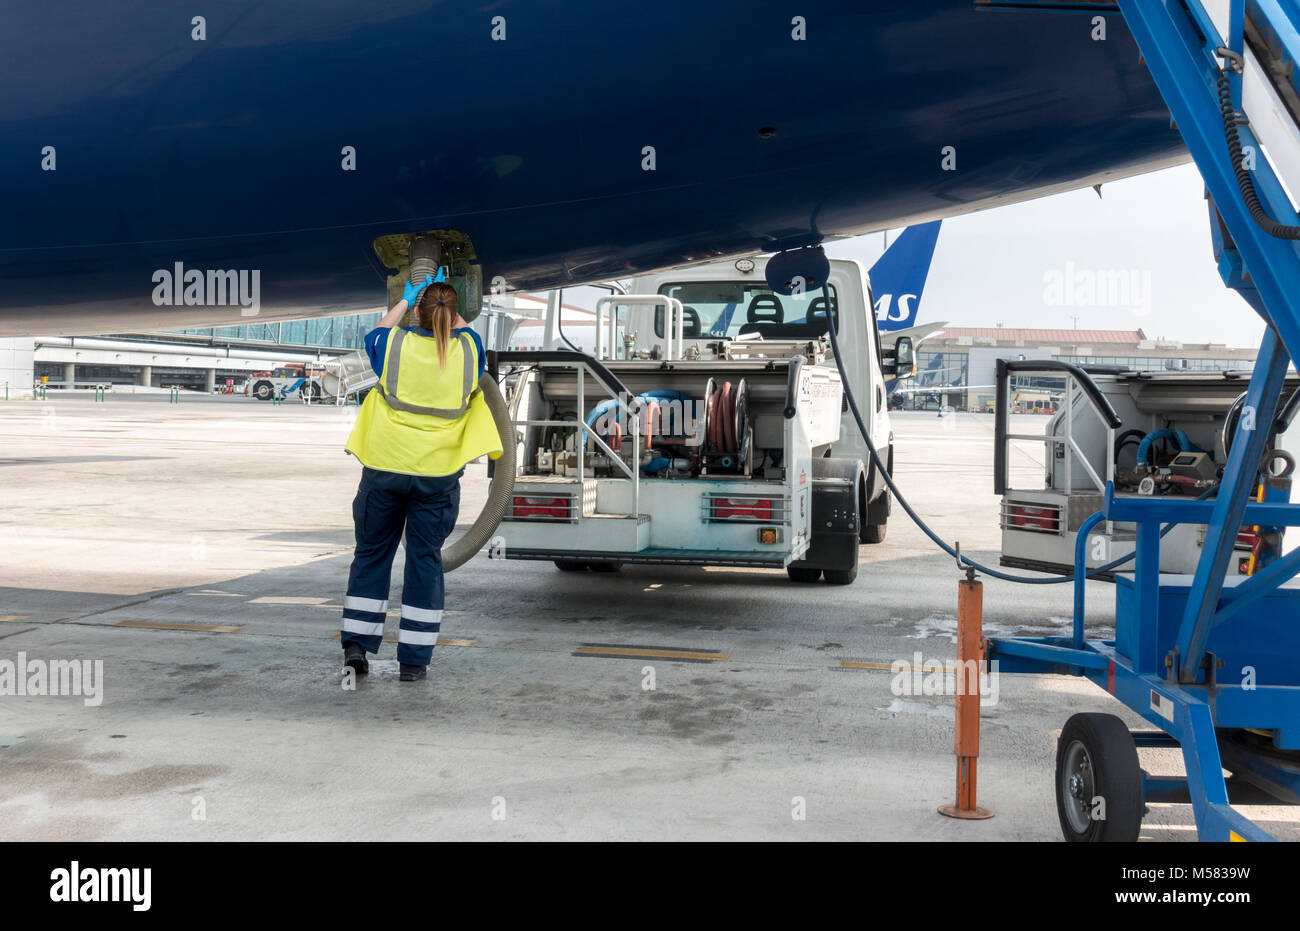 Female lav agent. Girl station attendant emptying a lavatory system of plane airplane aeroplane on tarmac. Woman ramper doing the lavs. Stock Photo